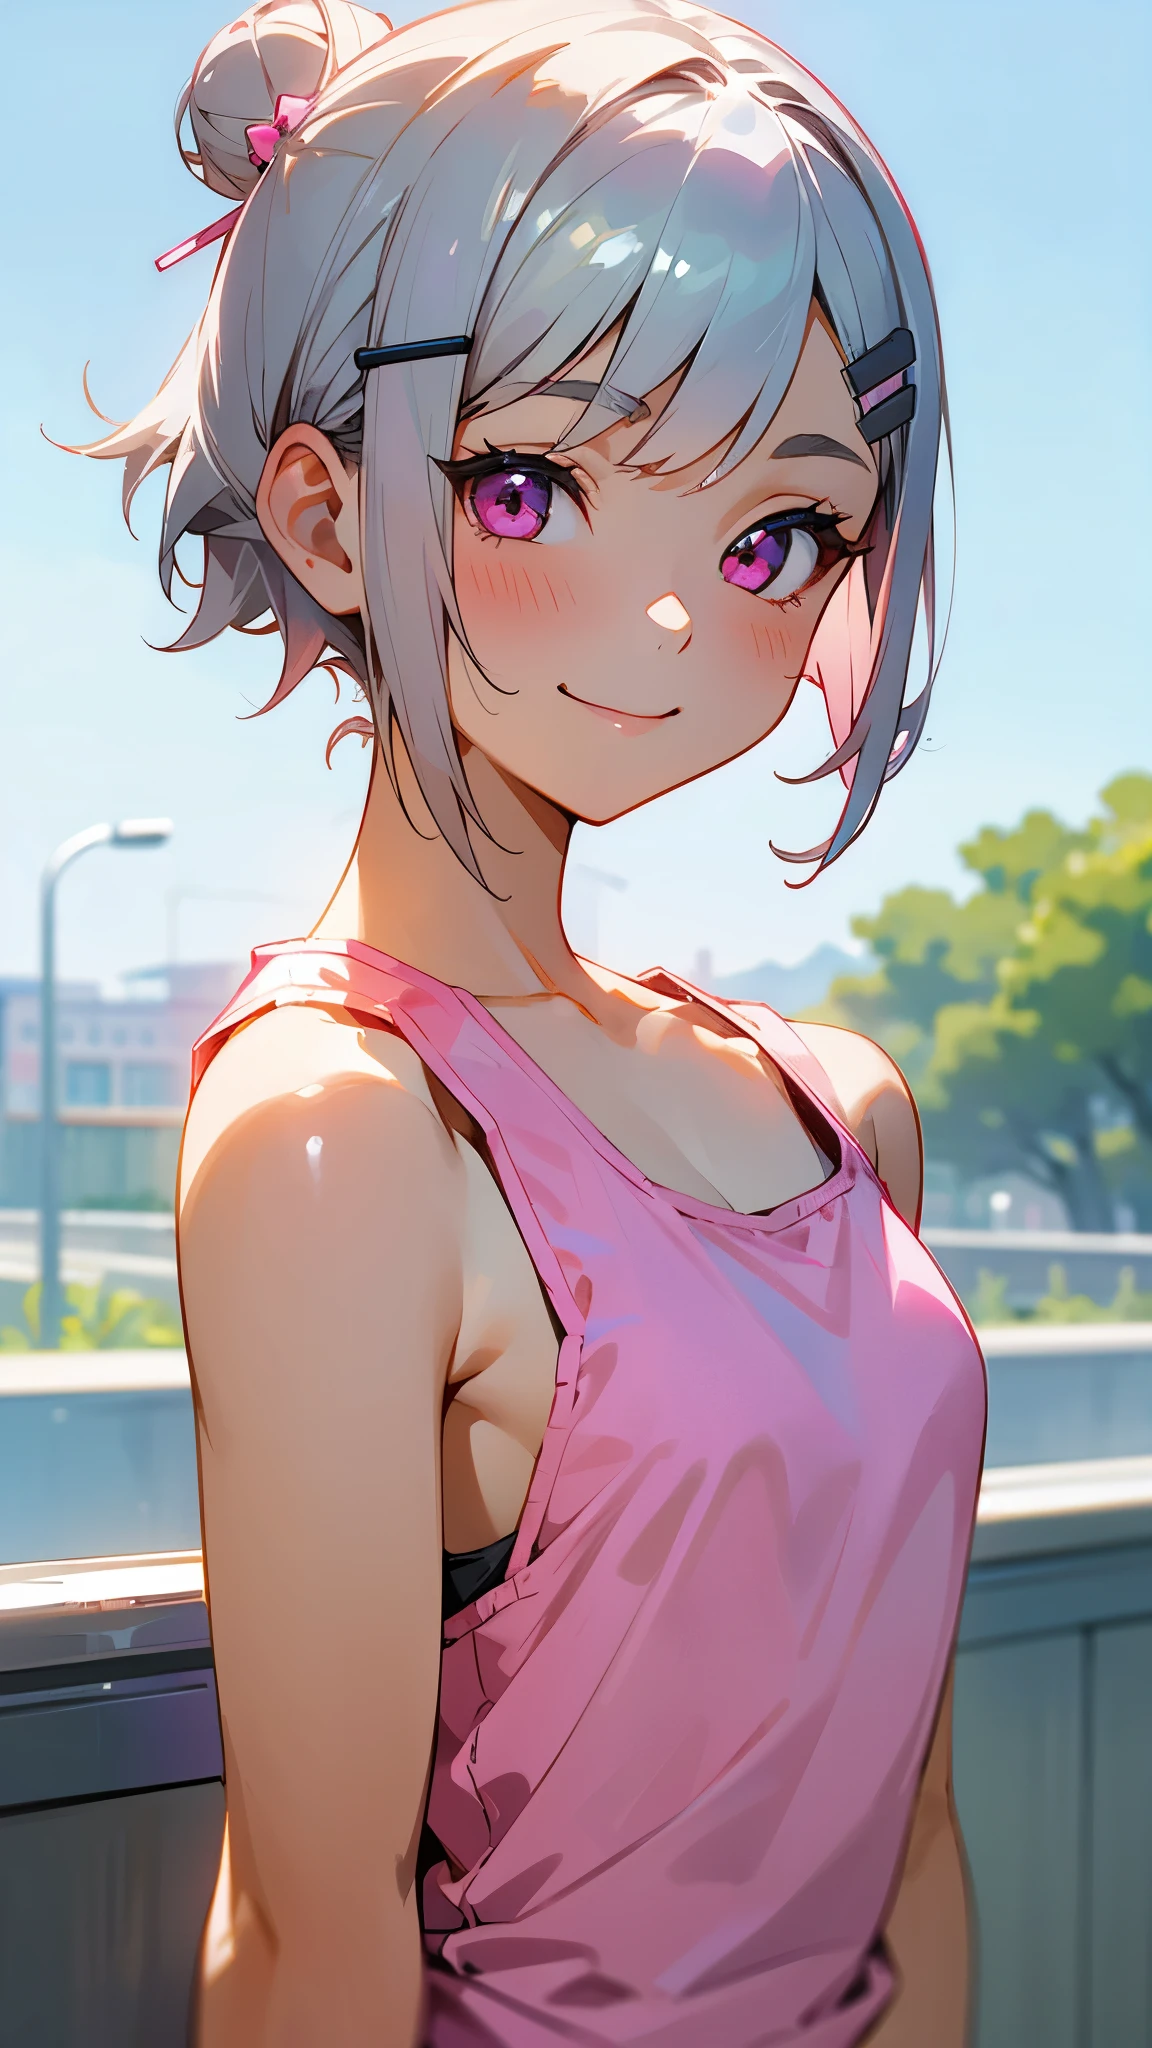 １girl、Short silver bob hair tied in a bun with a hair clip, Pink Eyes、smile、really like、Pink tank top、hot pants、Upper body close-up、Morning Cafe Terrace、Background blur, Written boundary depth